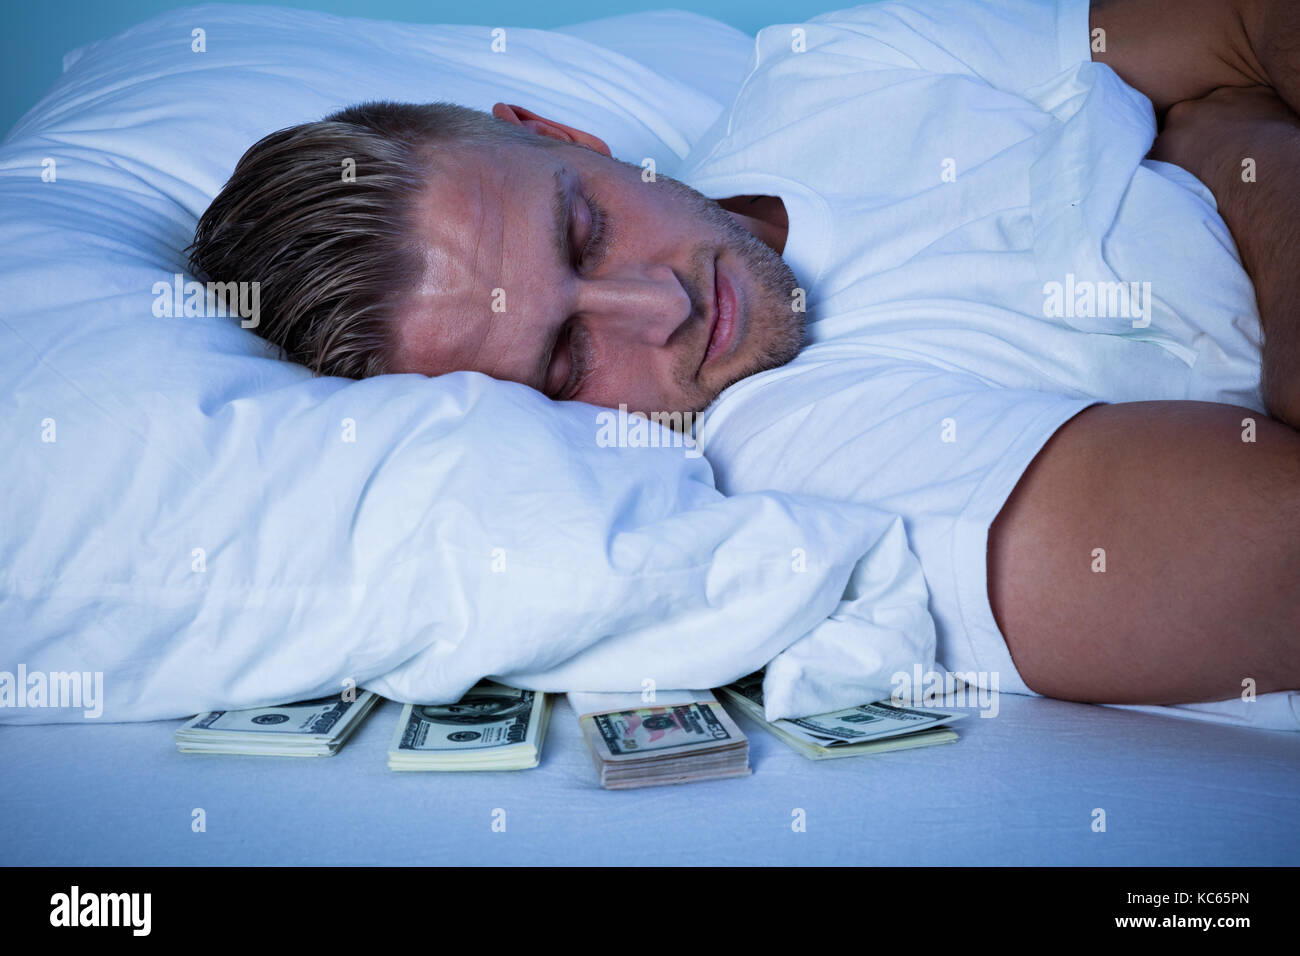 Close-up Of A Man Sleeping With Currency Notes Kept Under His Pillow On Bed Stock Photo